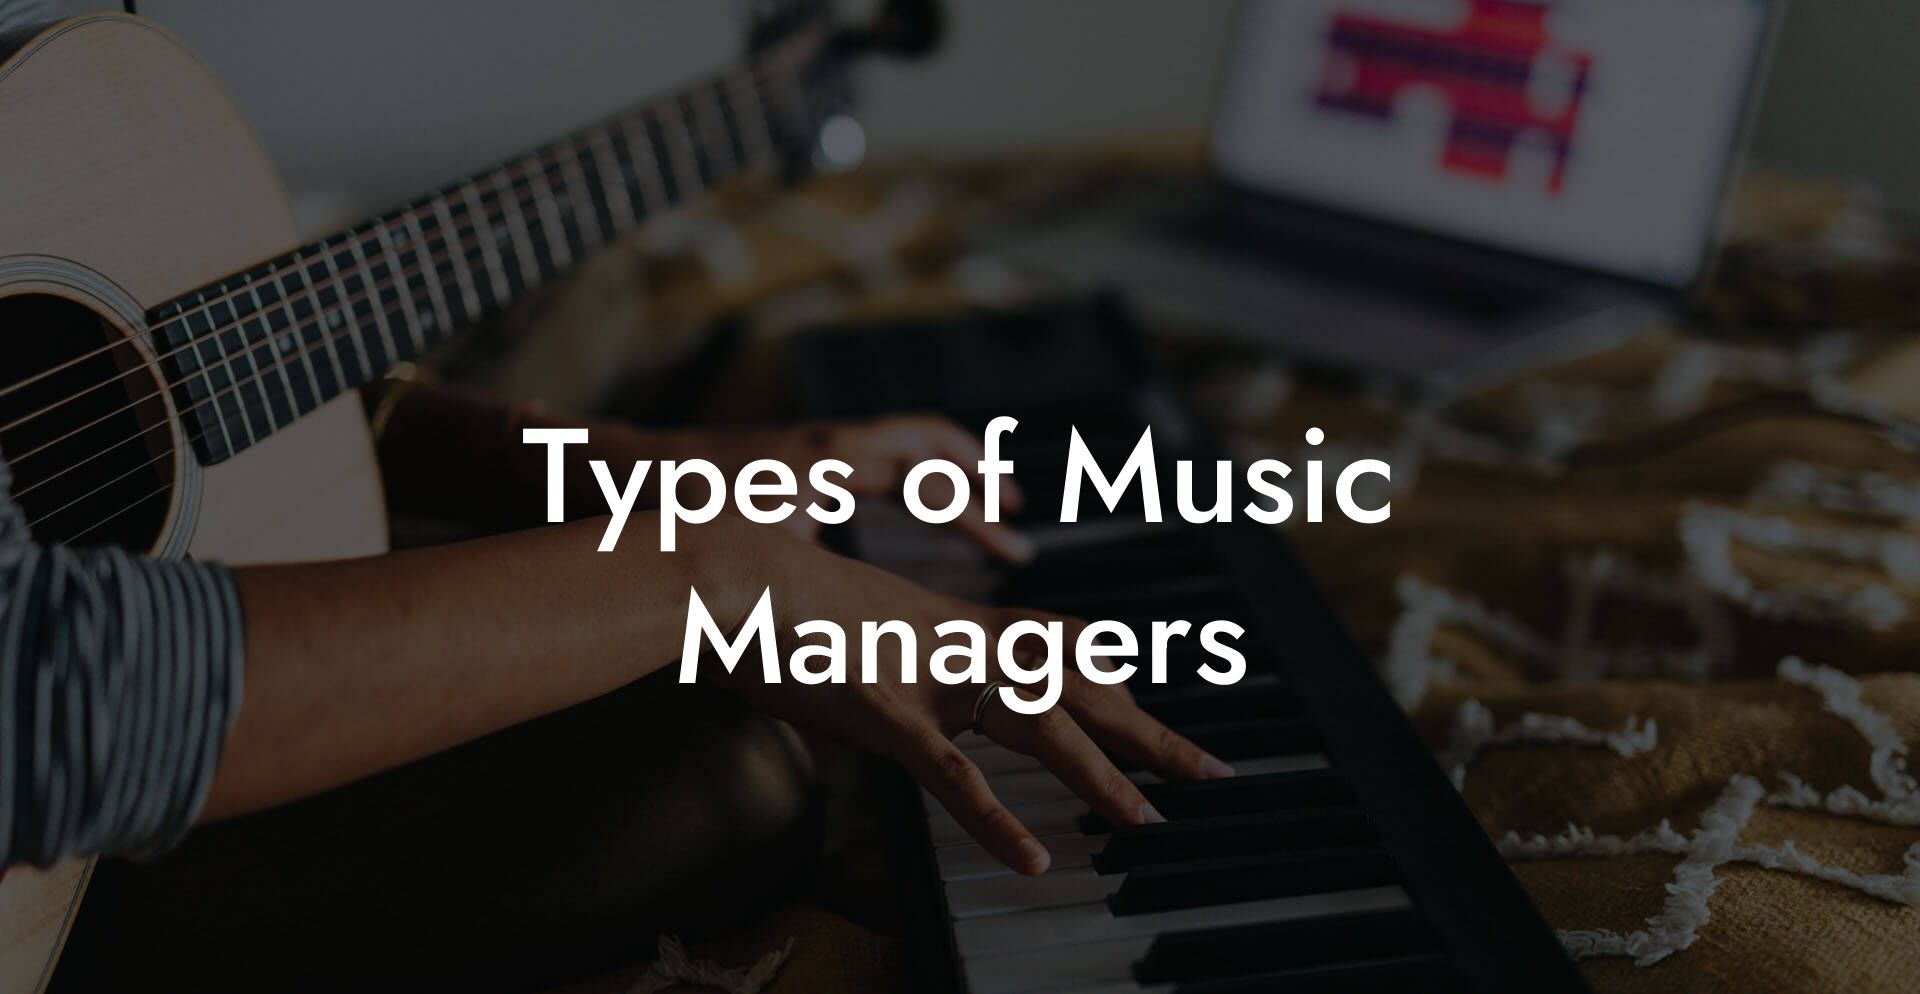 Types of Music Managers